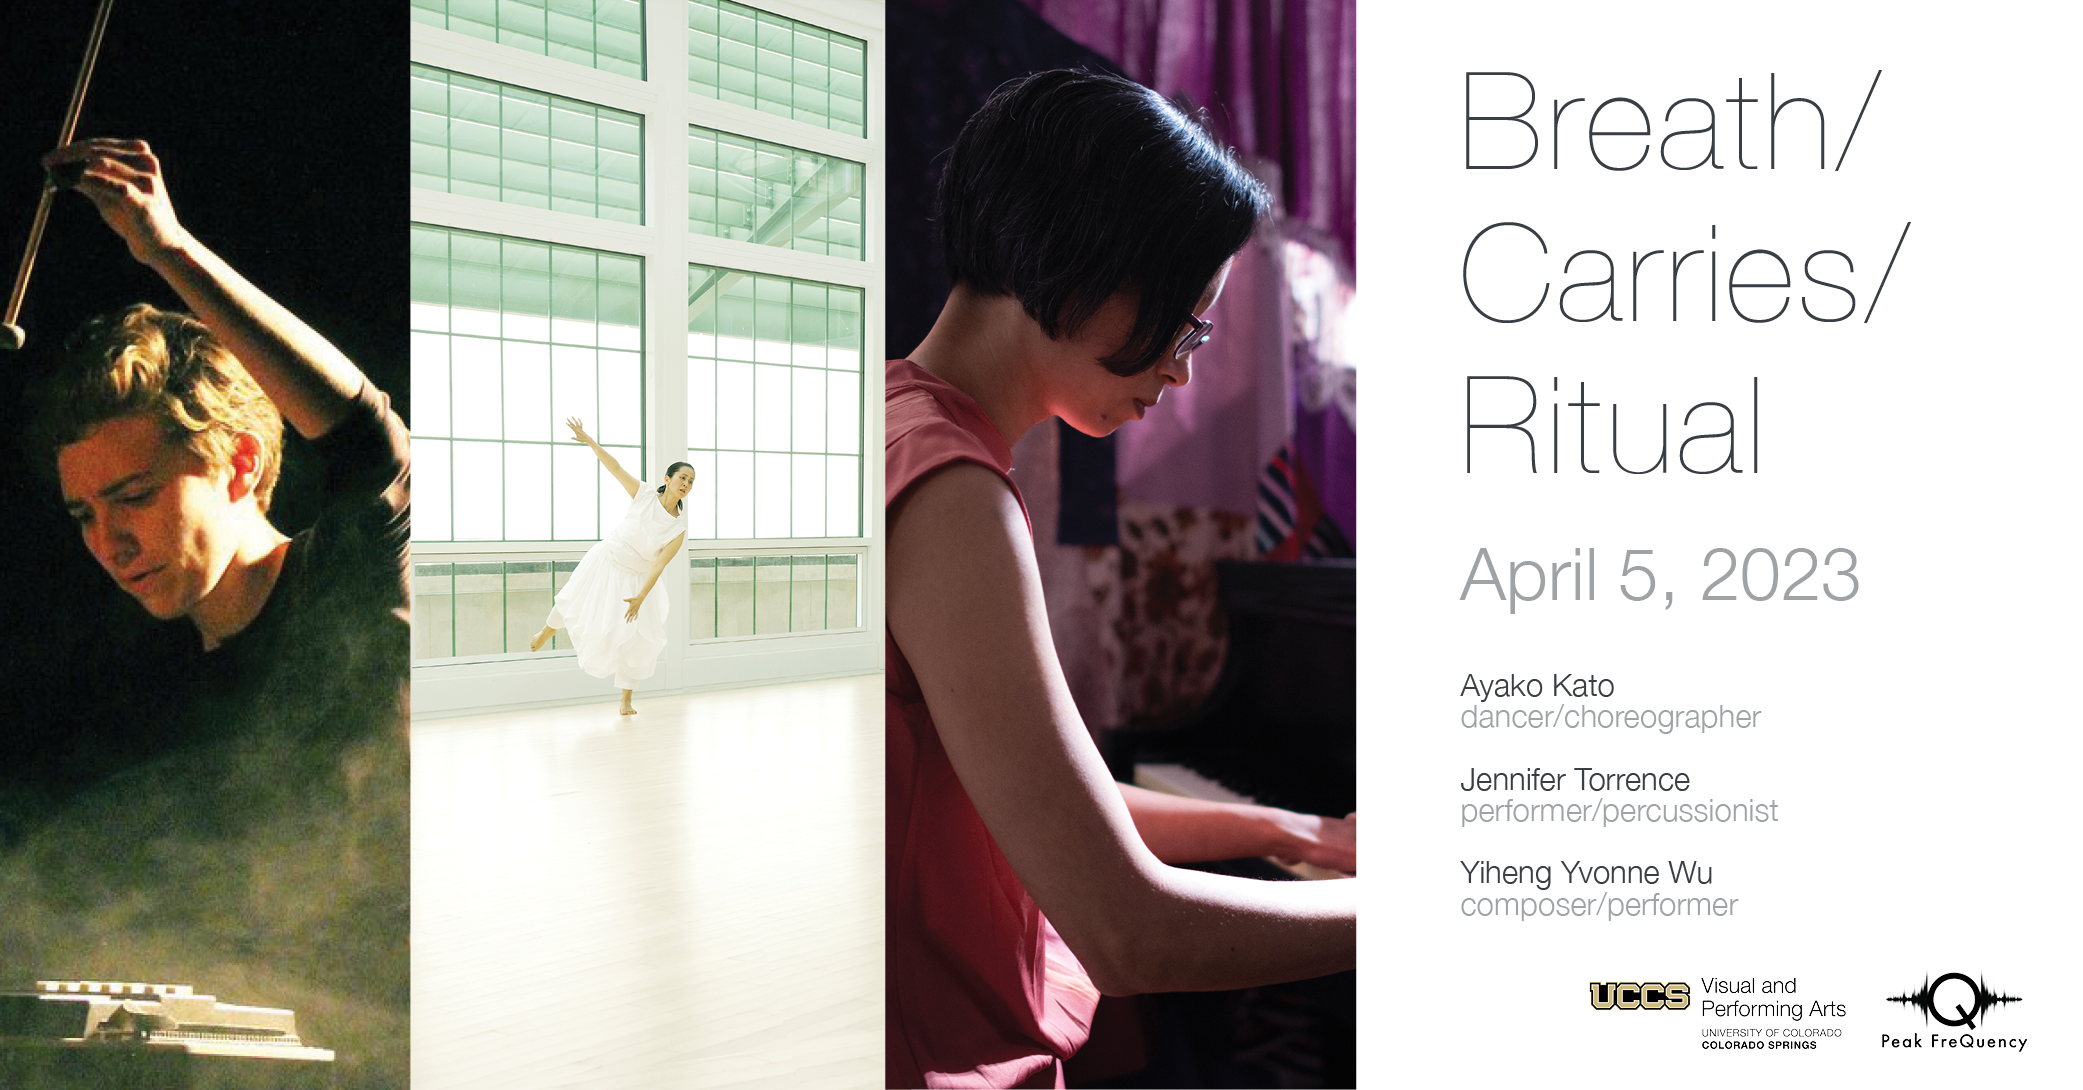 Triptych of Jennifer Torrence performing on drums, Ayako Kato dancing, and Yiheng Yvonne Wu on piano with text details of event